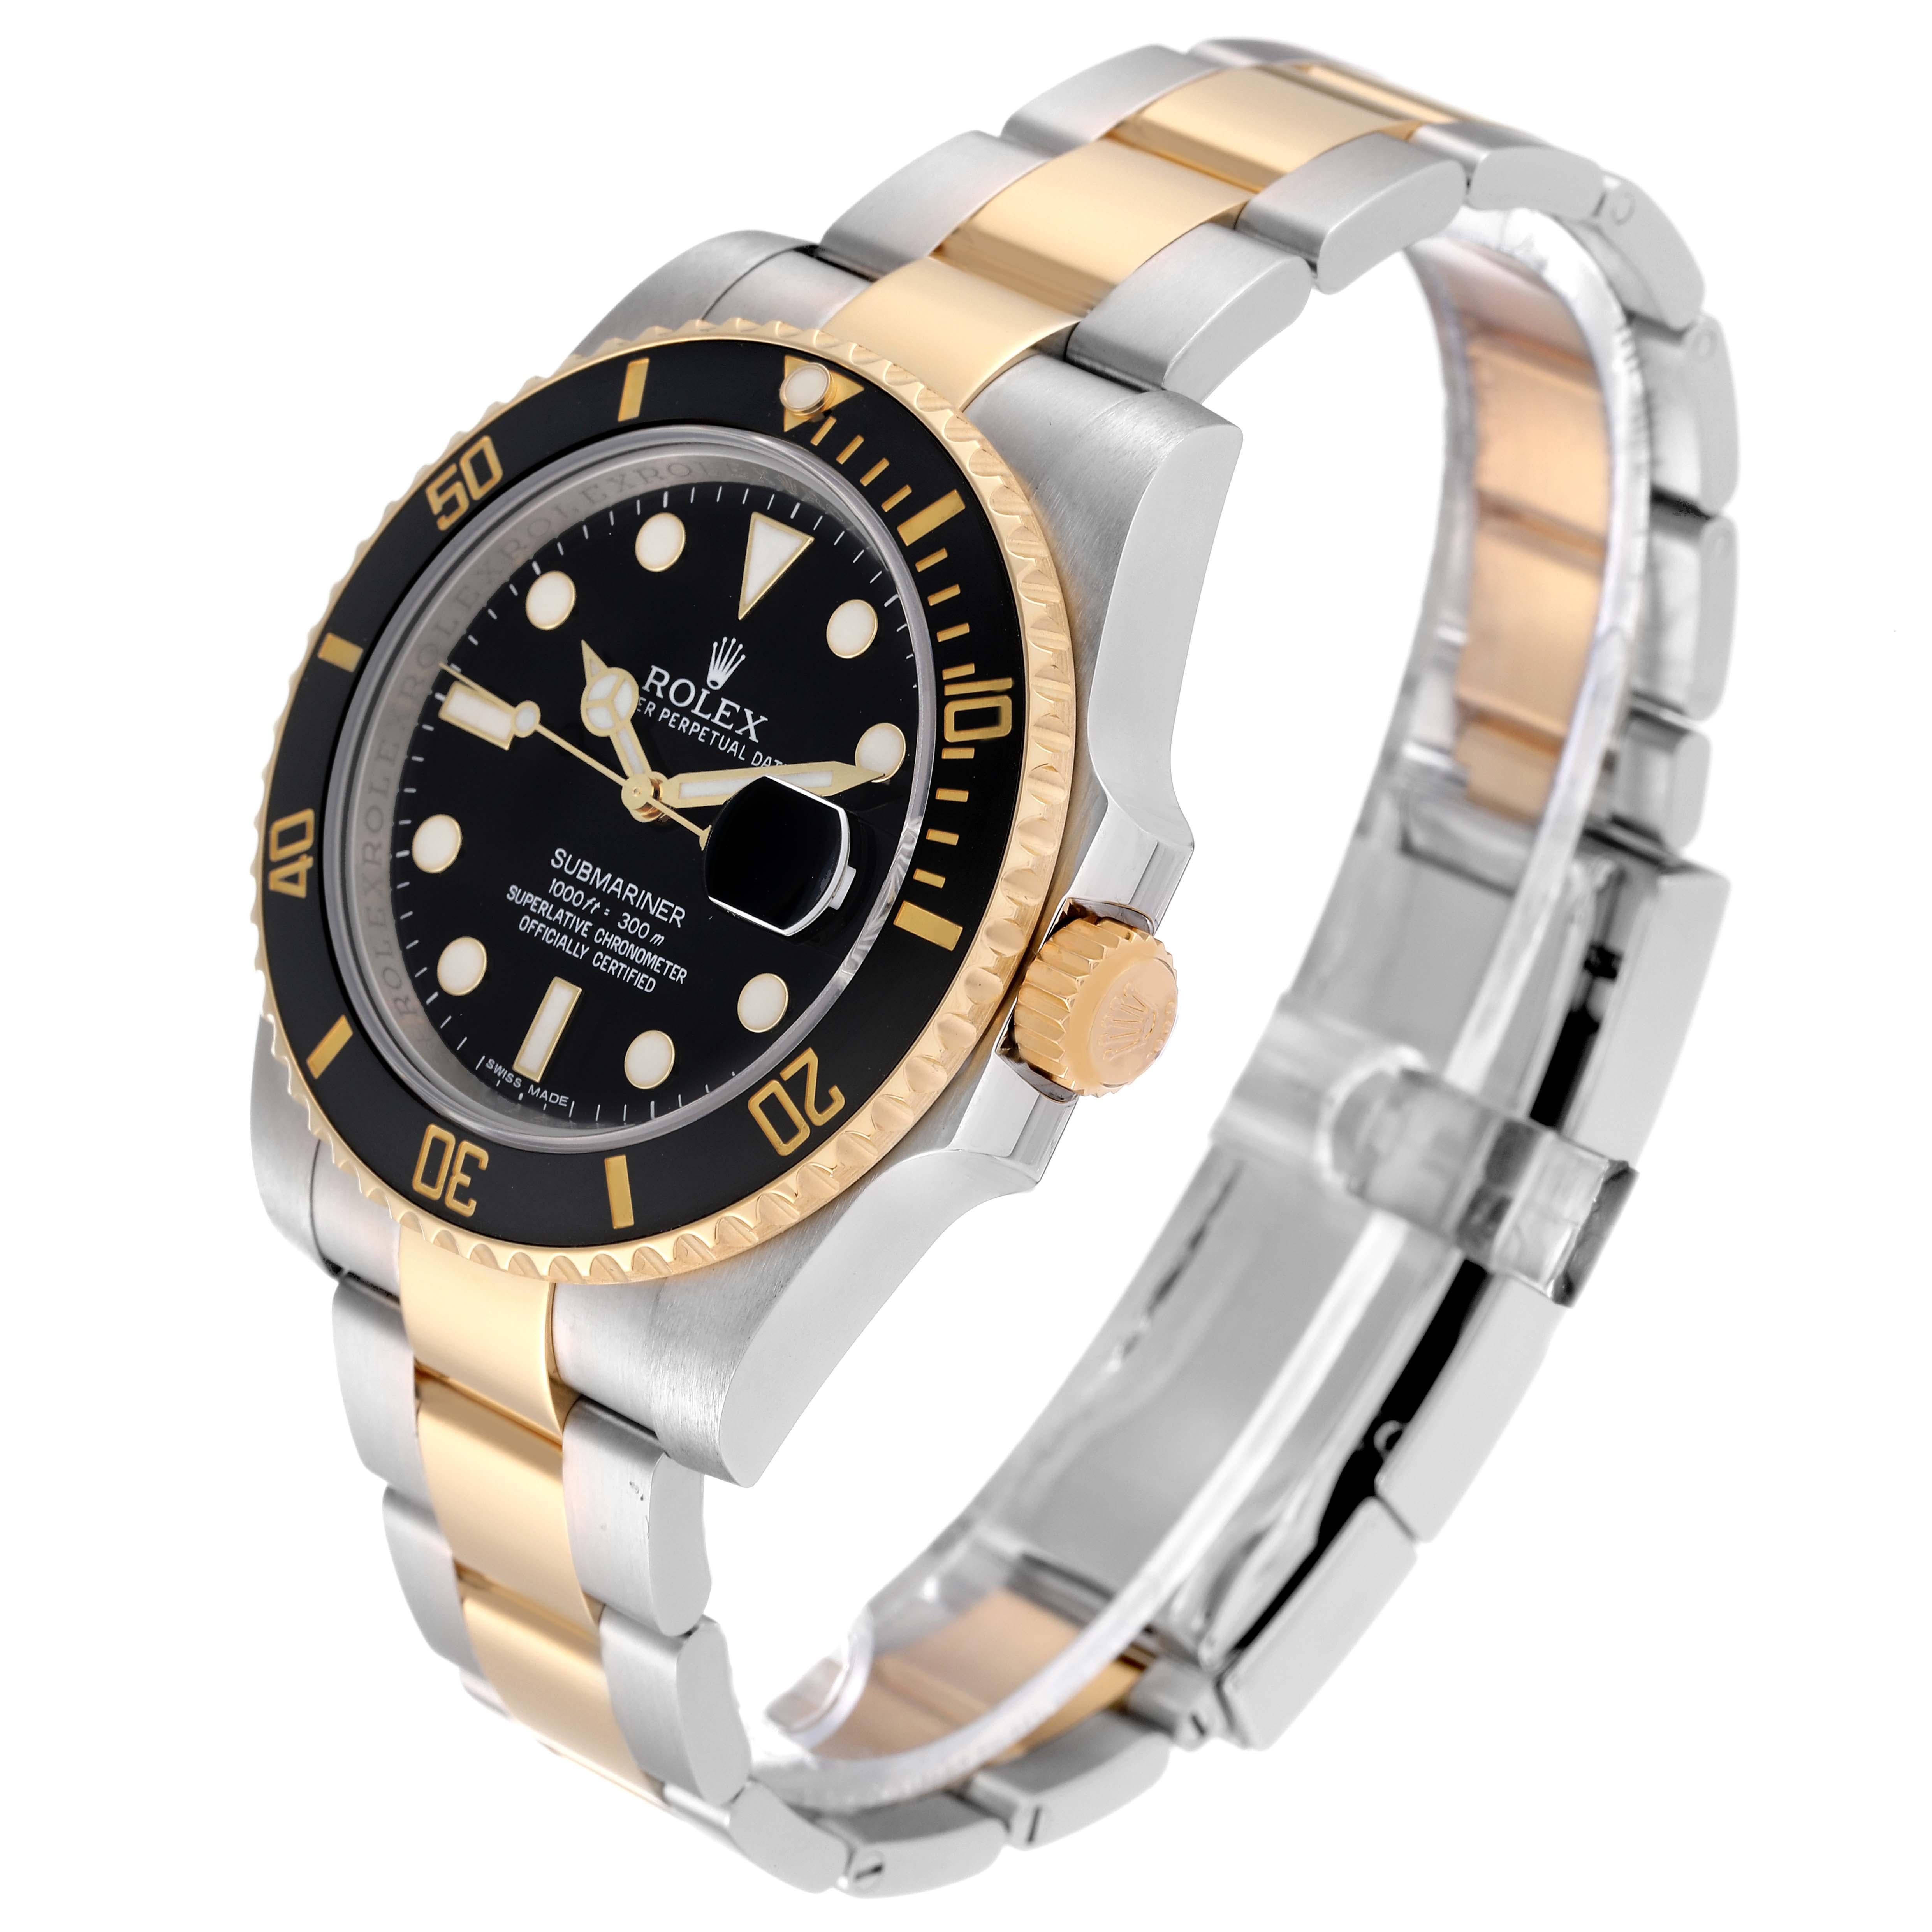 Rolex Submariner Steel Yellow Gold Black Dial Mens Watch 116613 Box Card 7